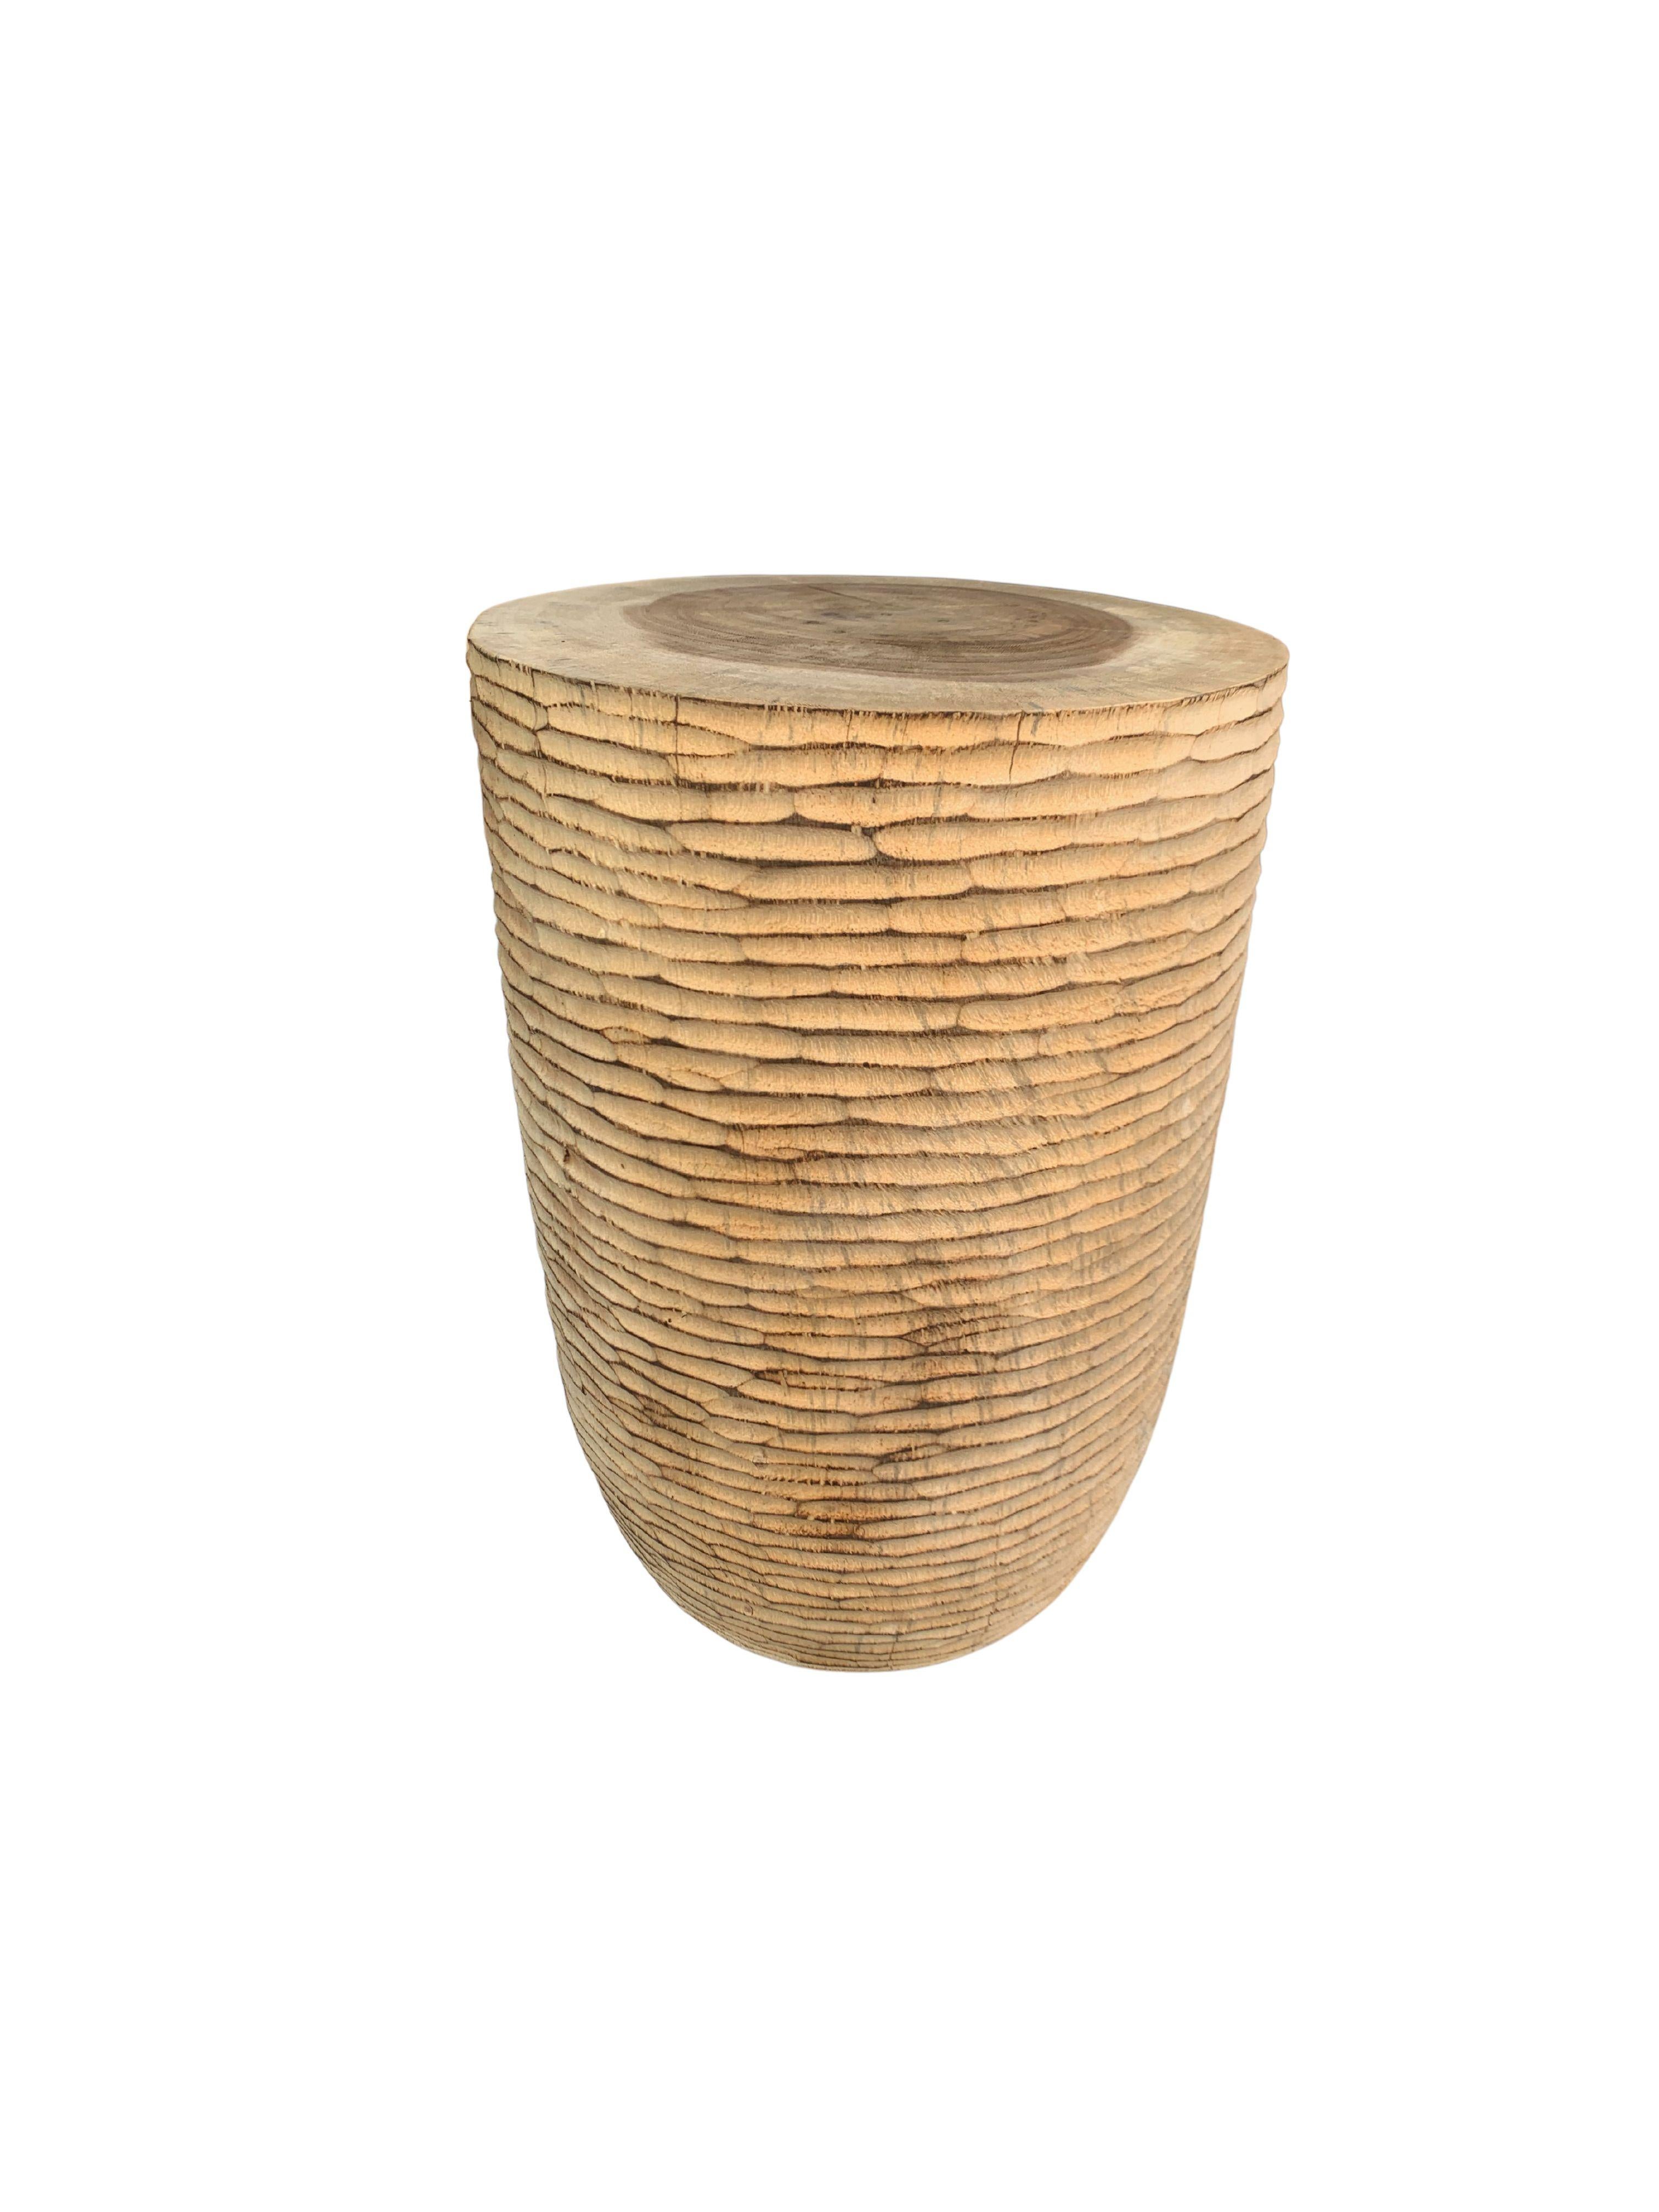 In its raw organic form, this wonderfully sculptural round side table features an elaborate hand hewn texture on its sides. Its narrow slender shape and mix of curves adds to its charm. The table's neutral pigment makes it perfect for any space. A